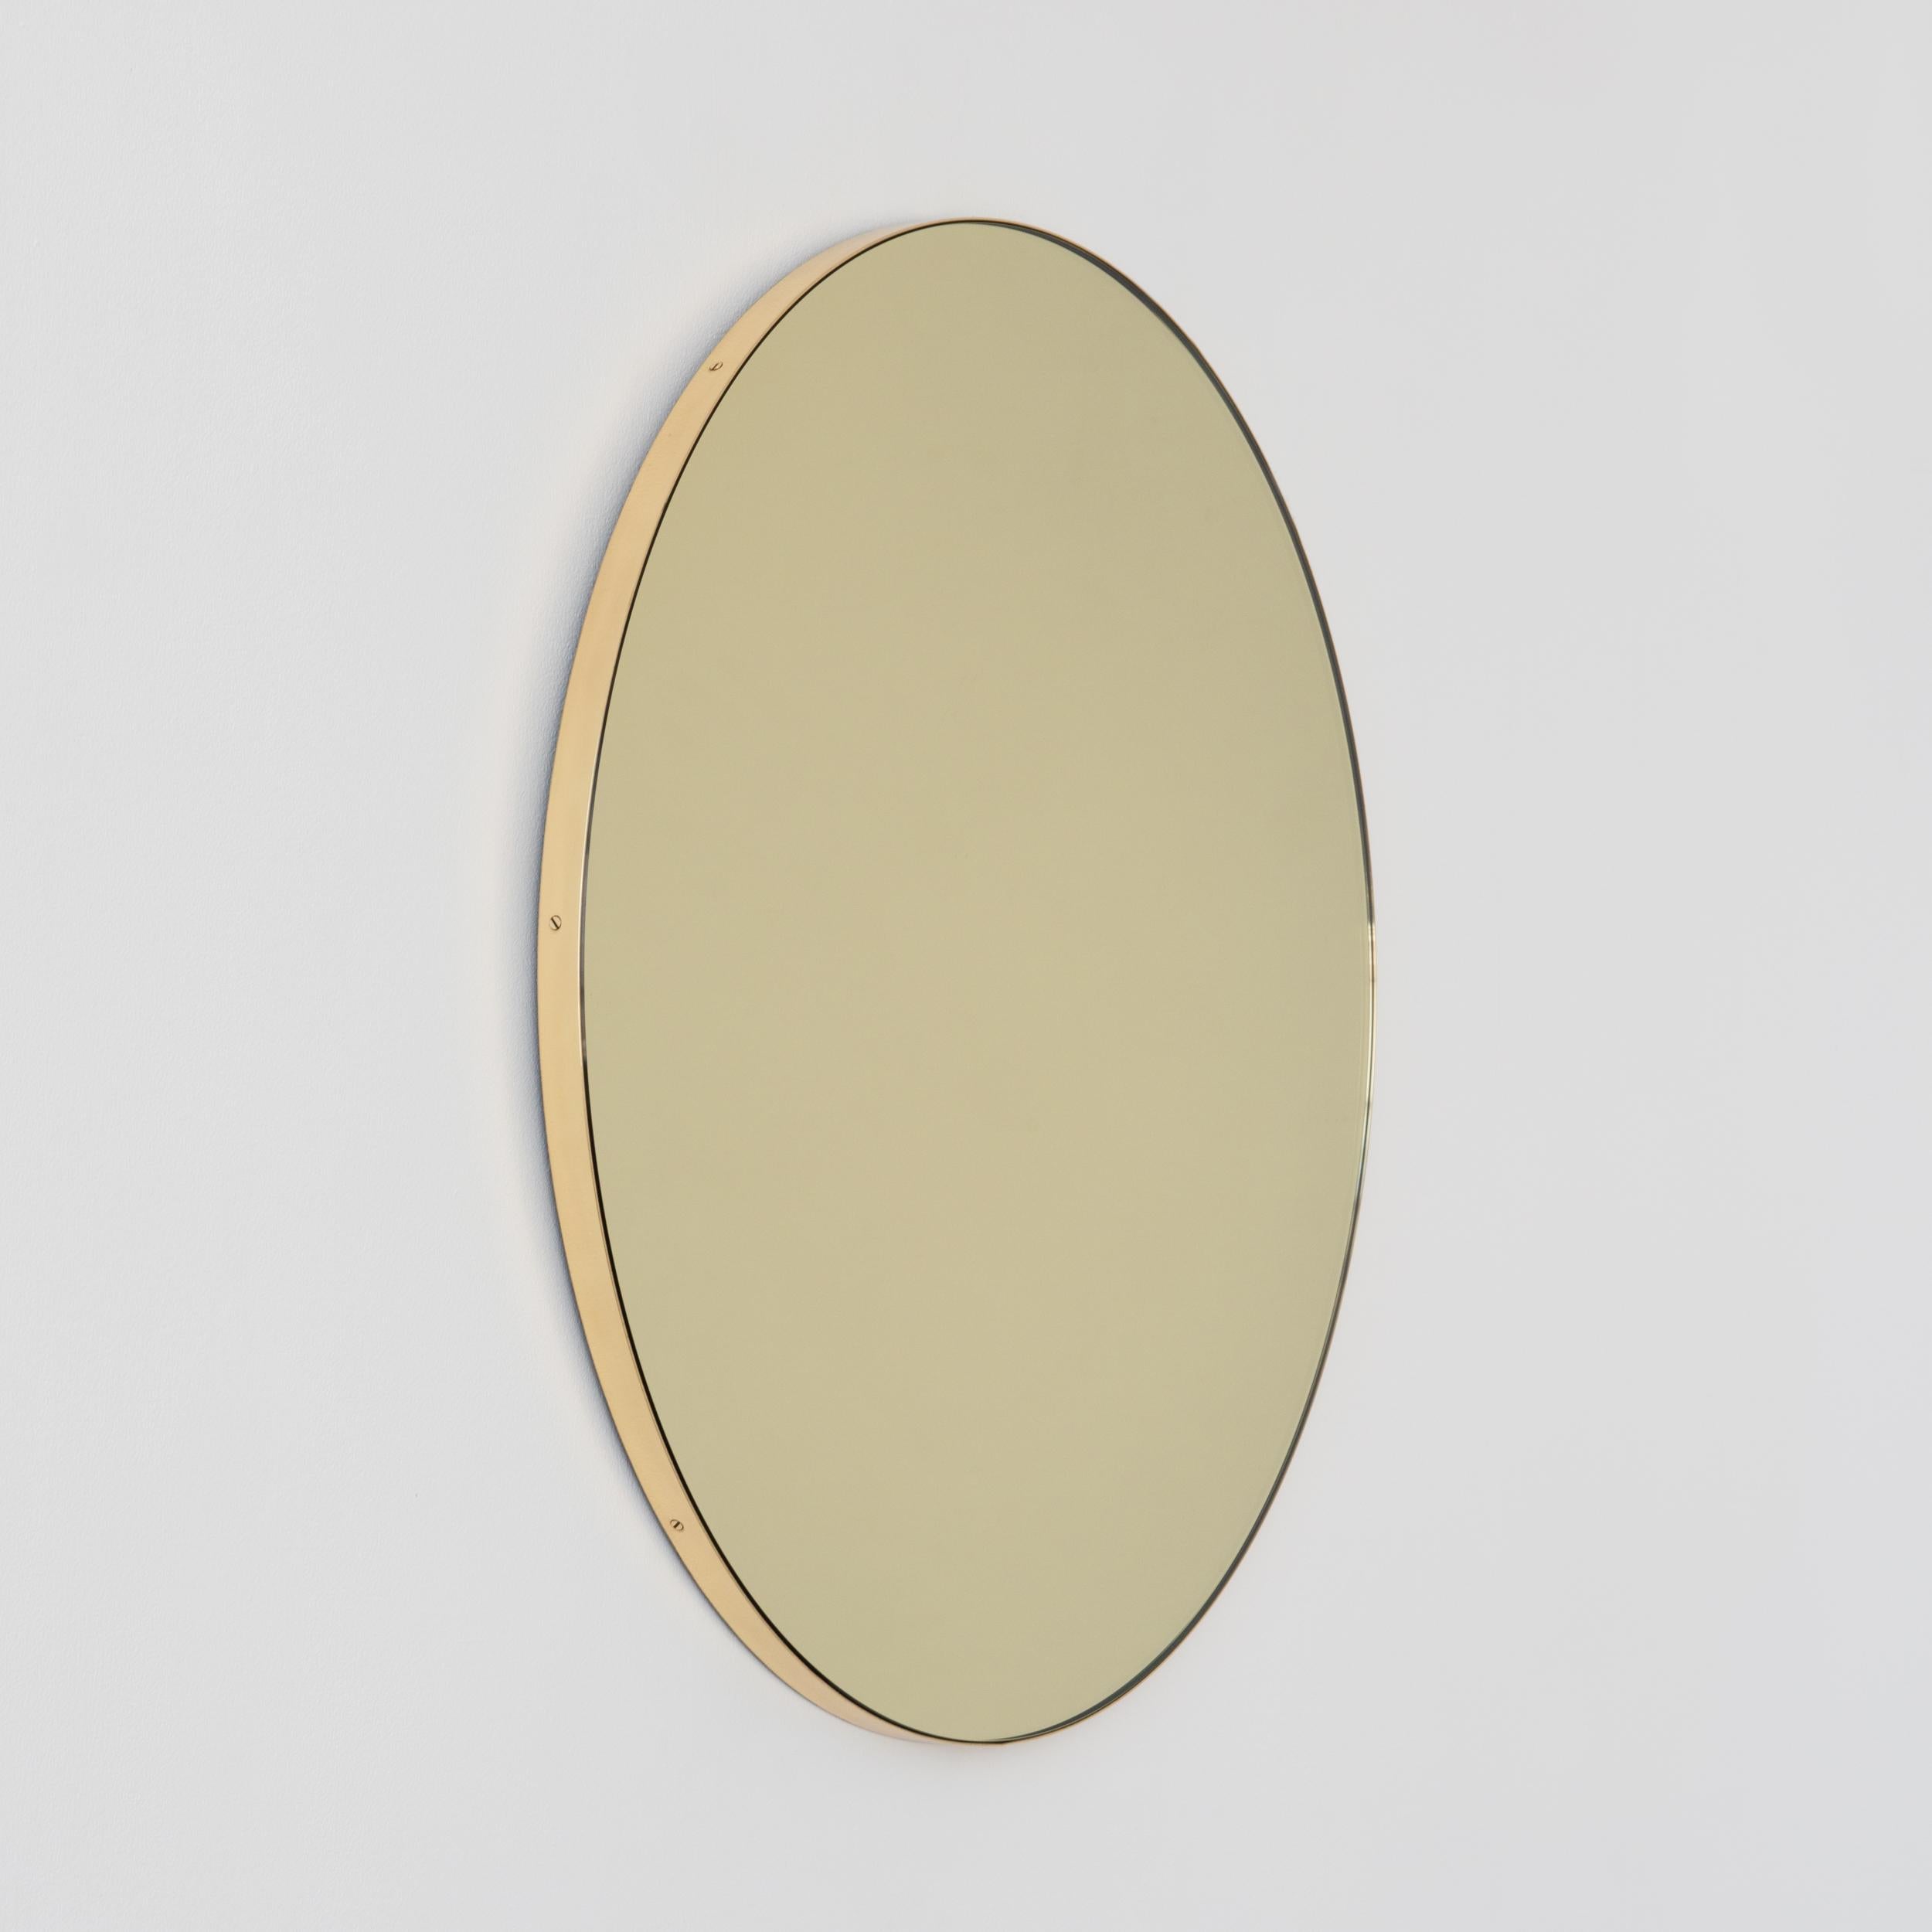 Contemporary gold tinted Orbis™ round mirror with a minimalist solid brushed brass frame. The detailing and finish, including visible brass screws, emphasise the craft and quality feel of the mirror, a true signature of our brand.  Designed and made